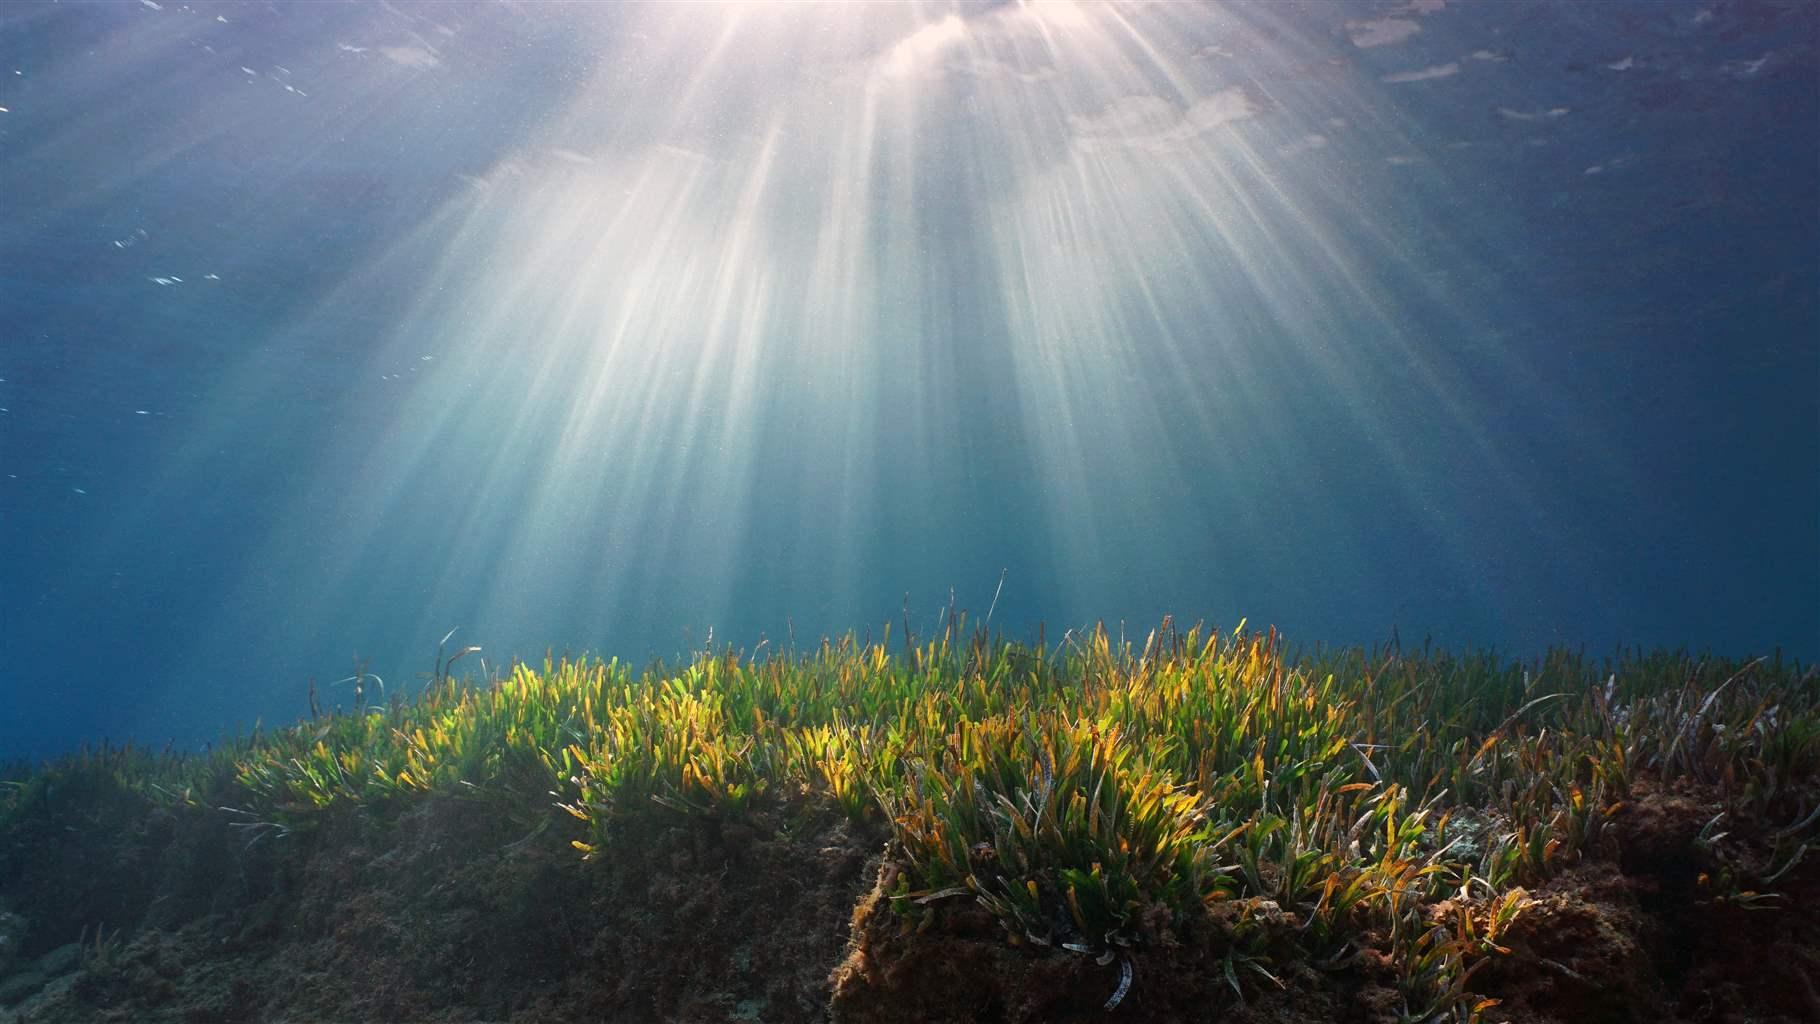 By sequestering carbon and protecting shorelines, seagrass can help communities mitigate and adapt to climate change.